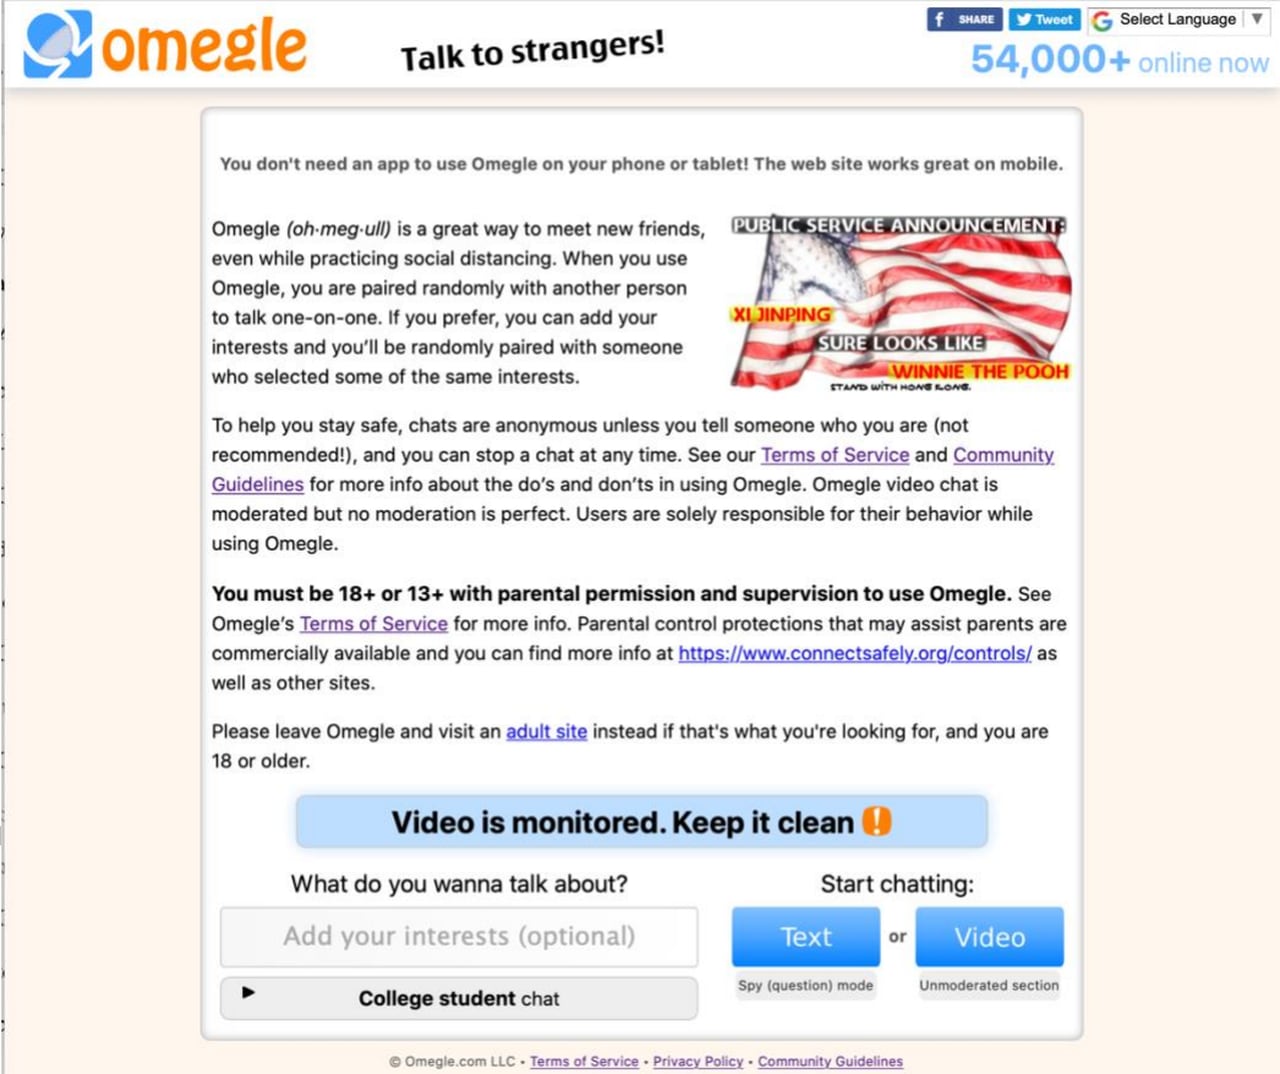 anita neufeld recommends naked women on omegle pic